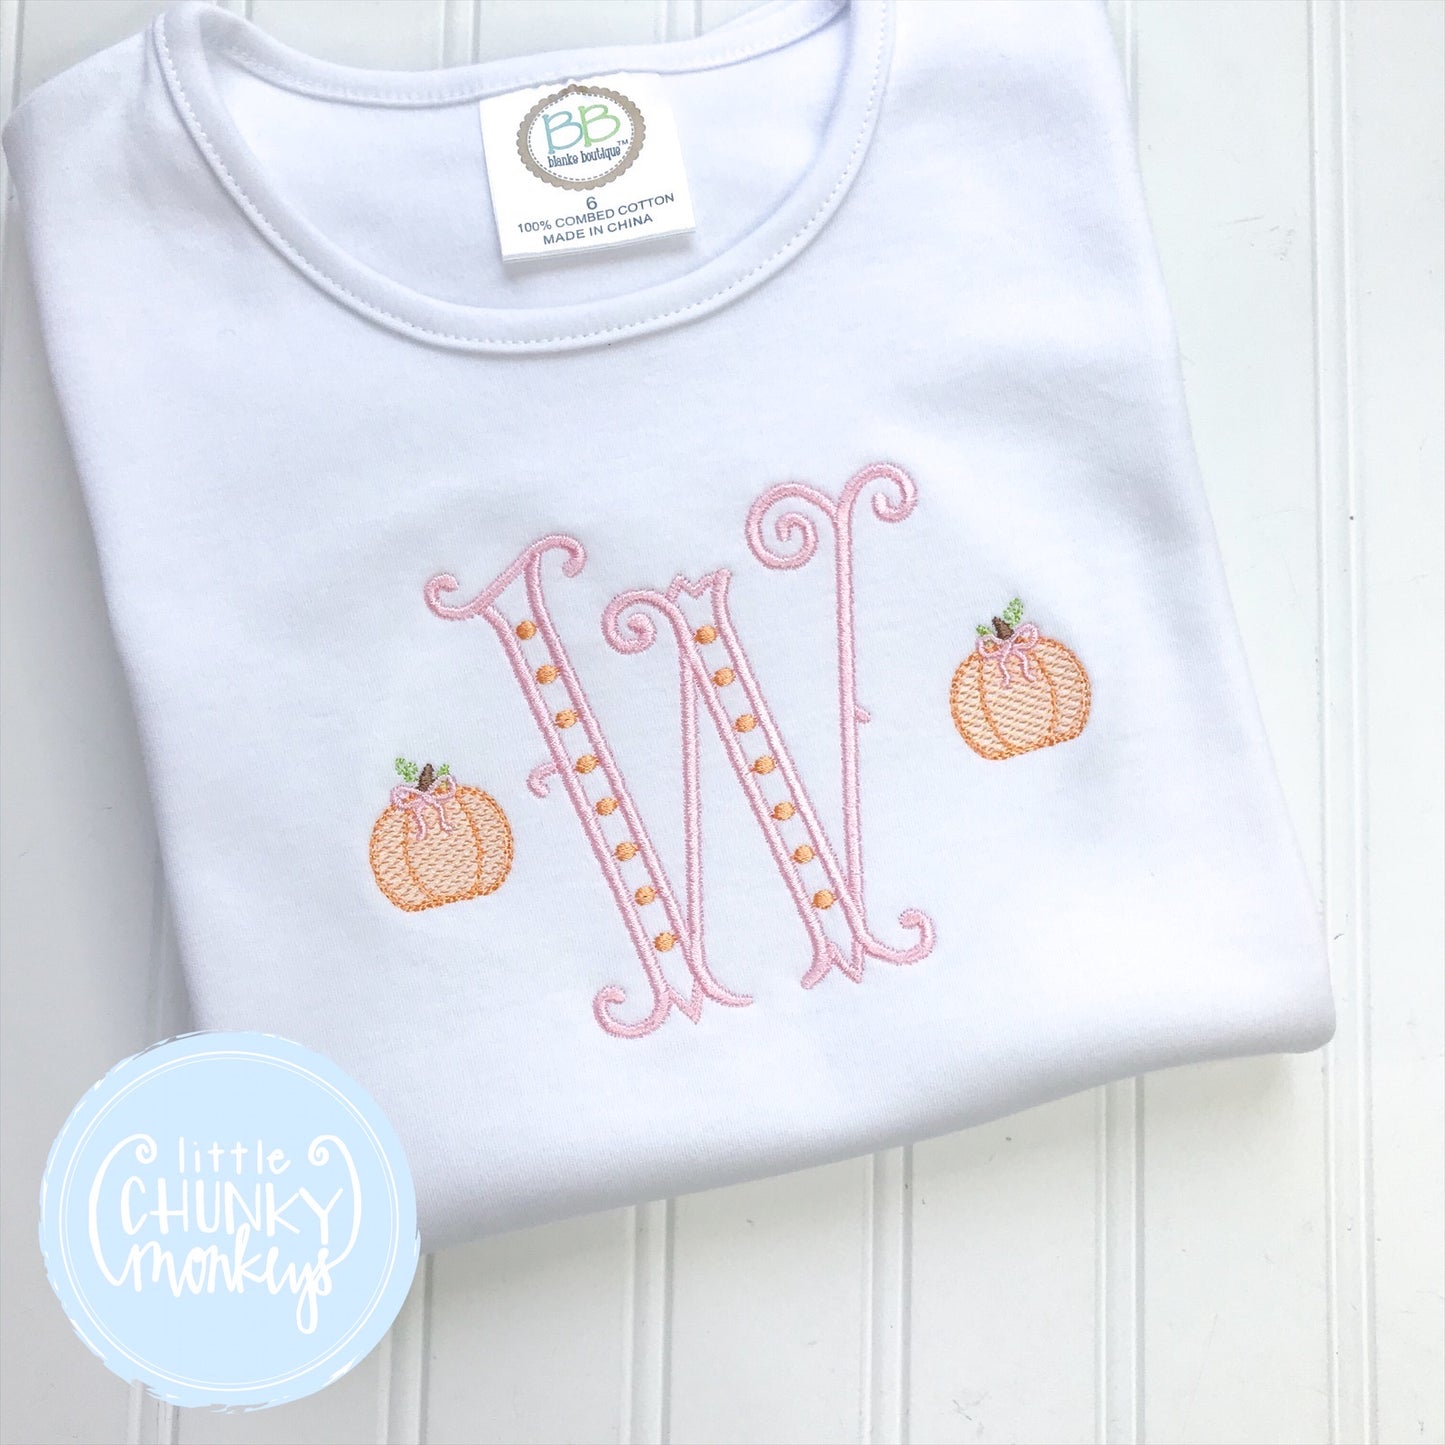 Girl Shirt- Stitched Single Initial with Mini Pumpkins on Each Side